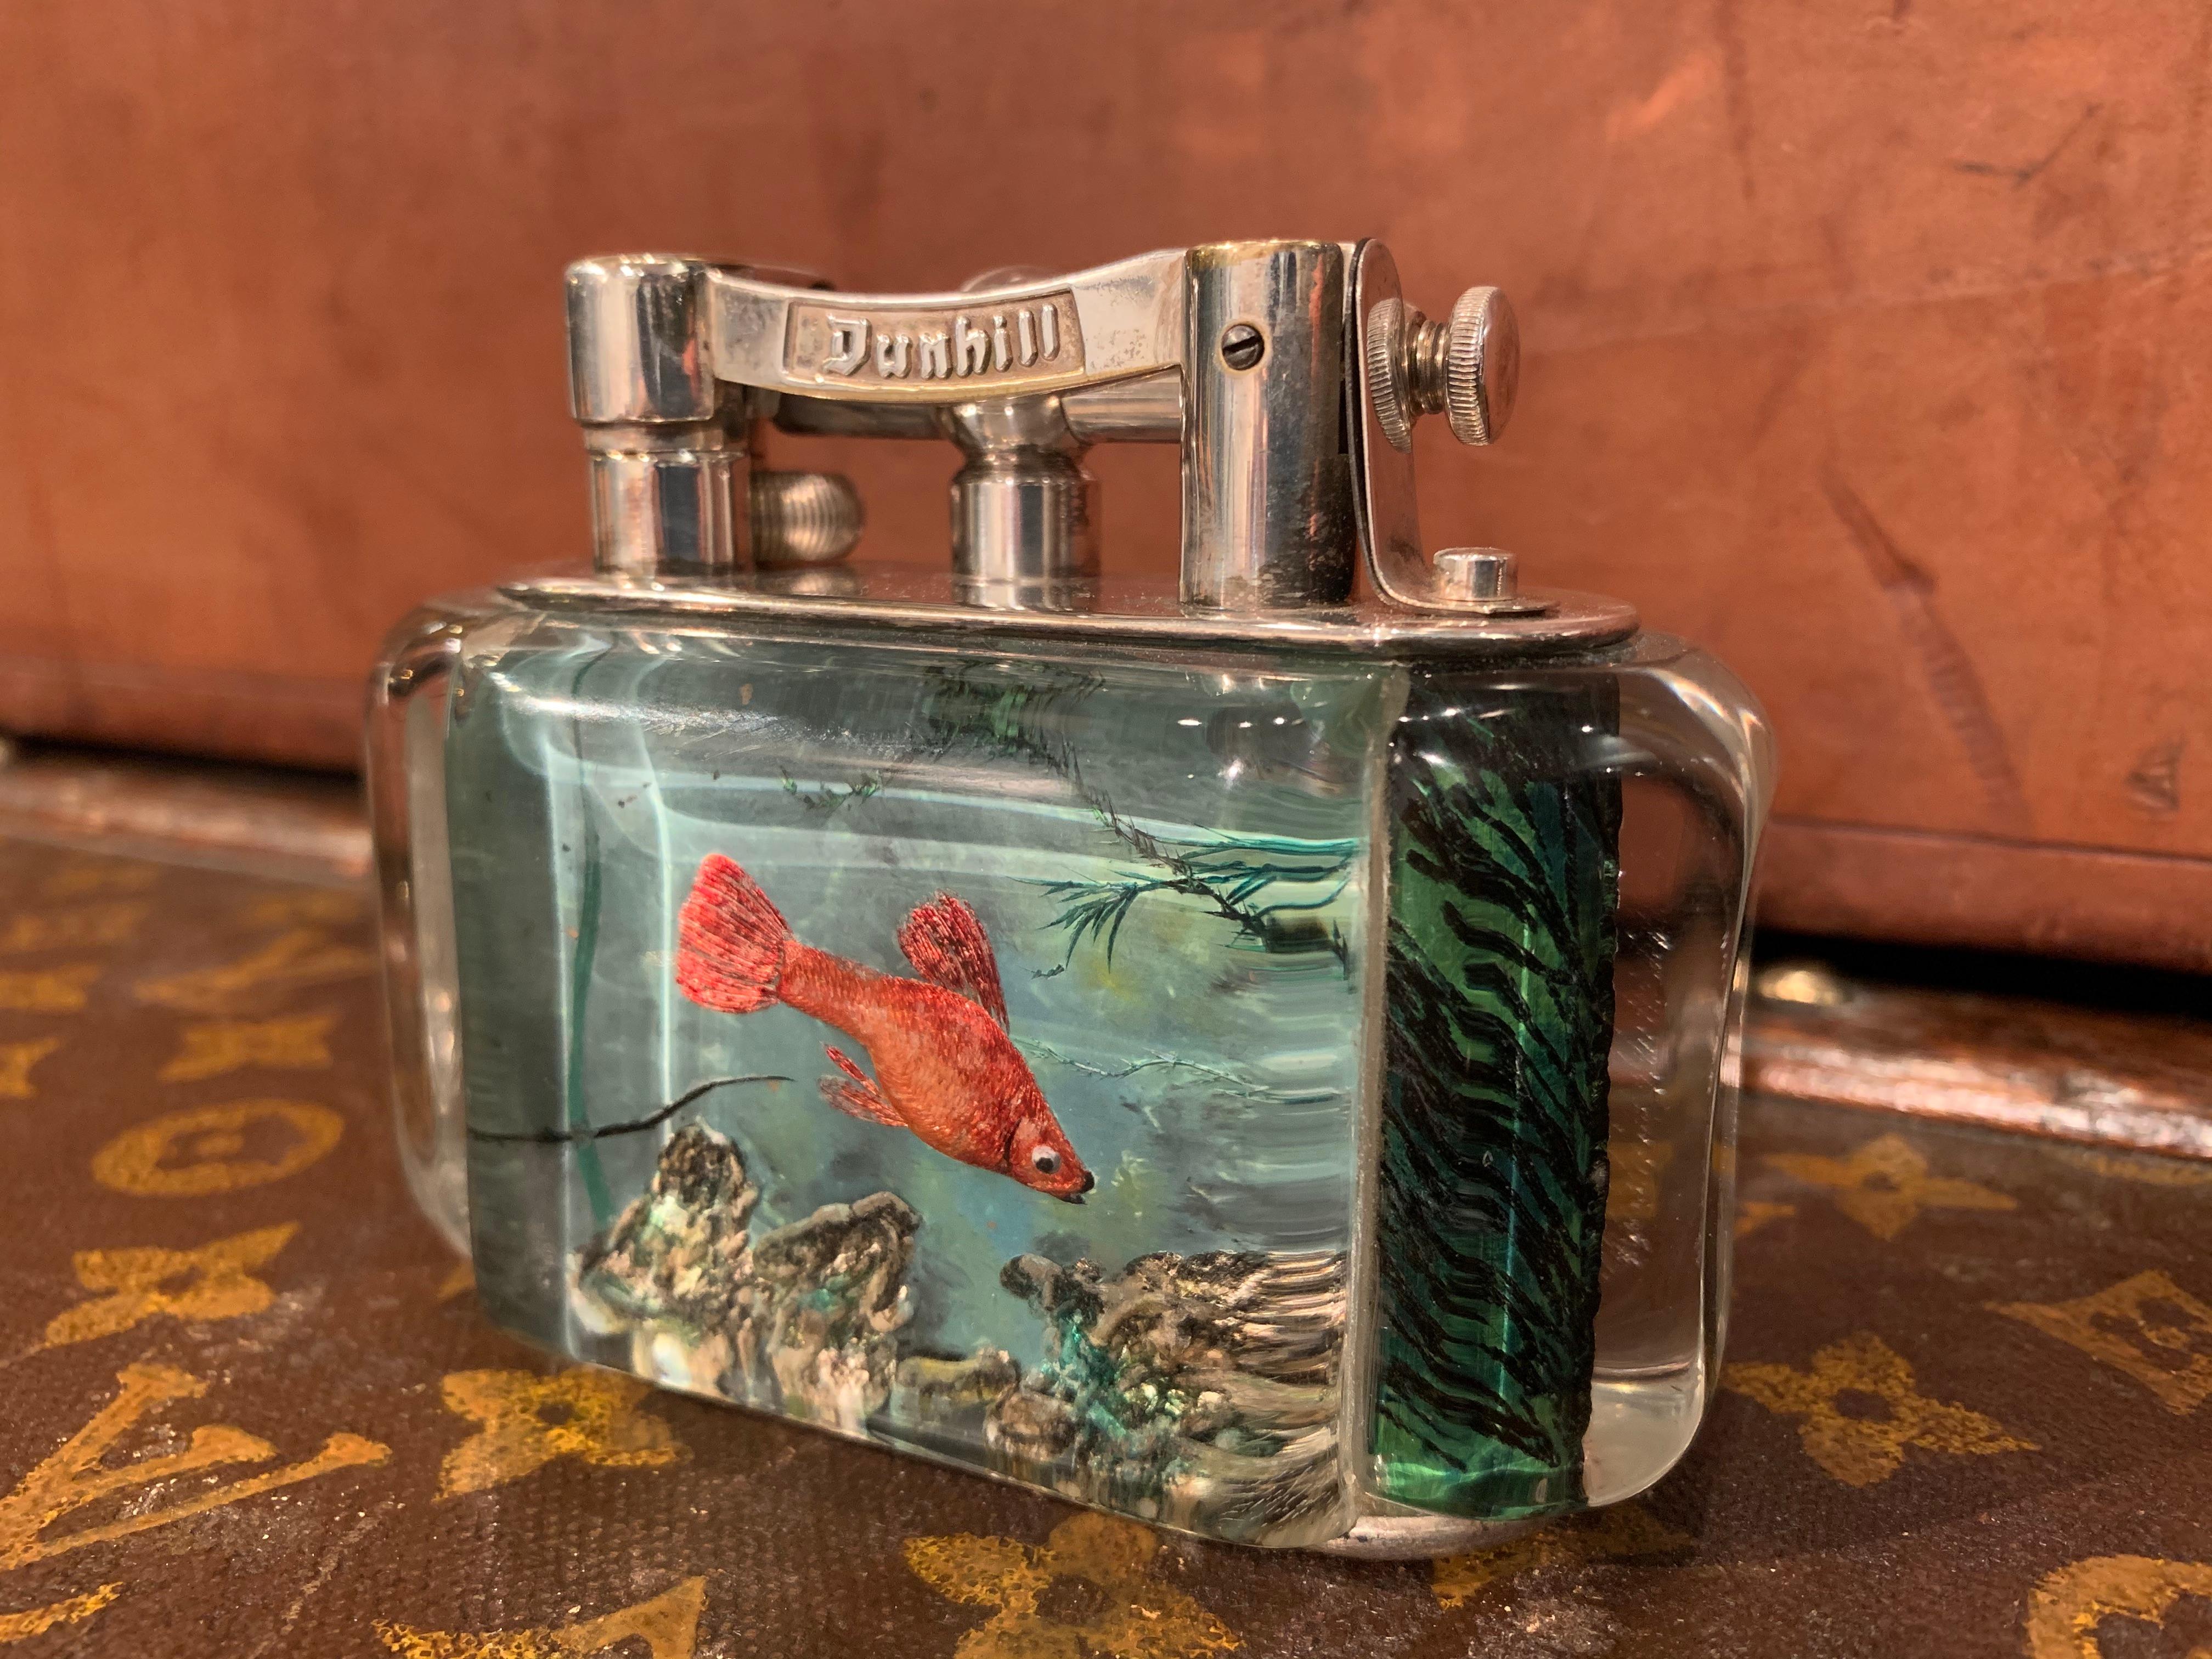 Mid-Century Modern Rare 1950s Dunhill Aquarium Half-Giant Lighter, Silver Plated, Made in England